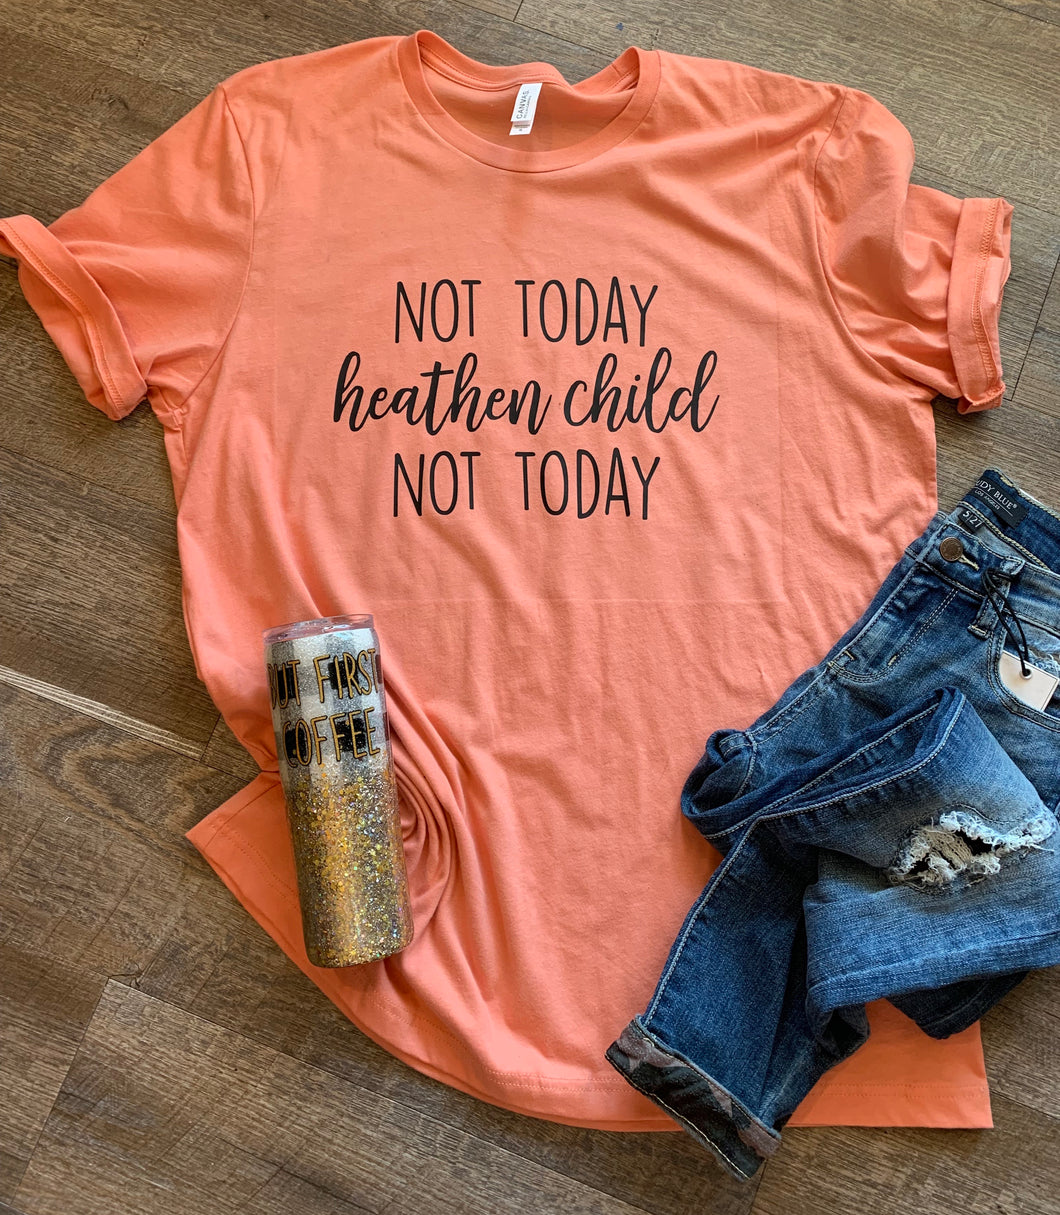 Not today heathen child not today. Funny womens graphic tee. Mom life shirt. - Mavictoria Designs Hot Press Express